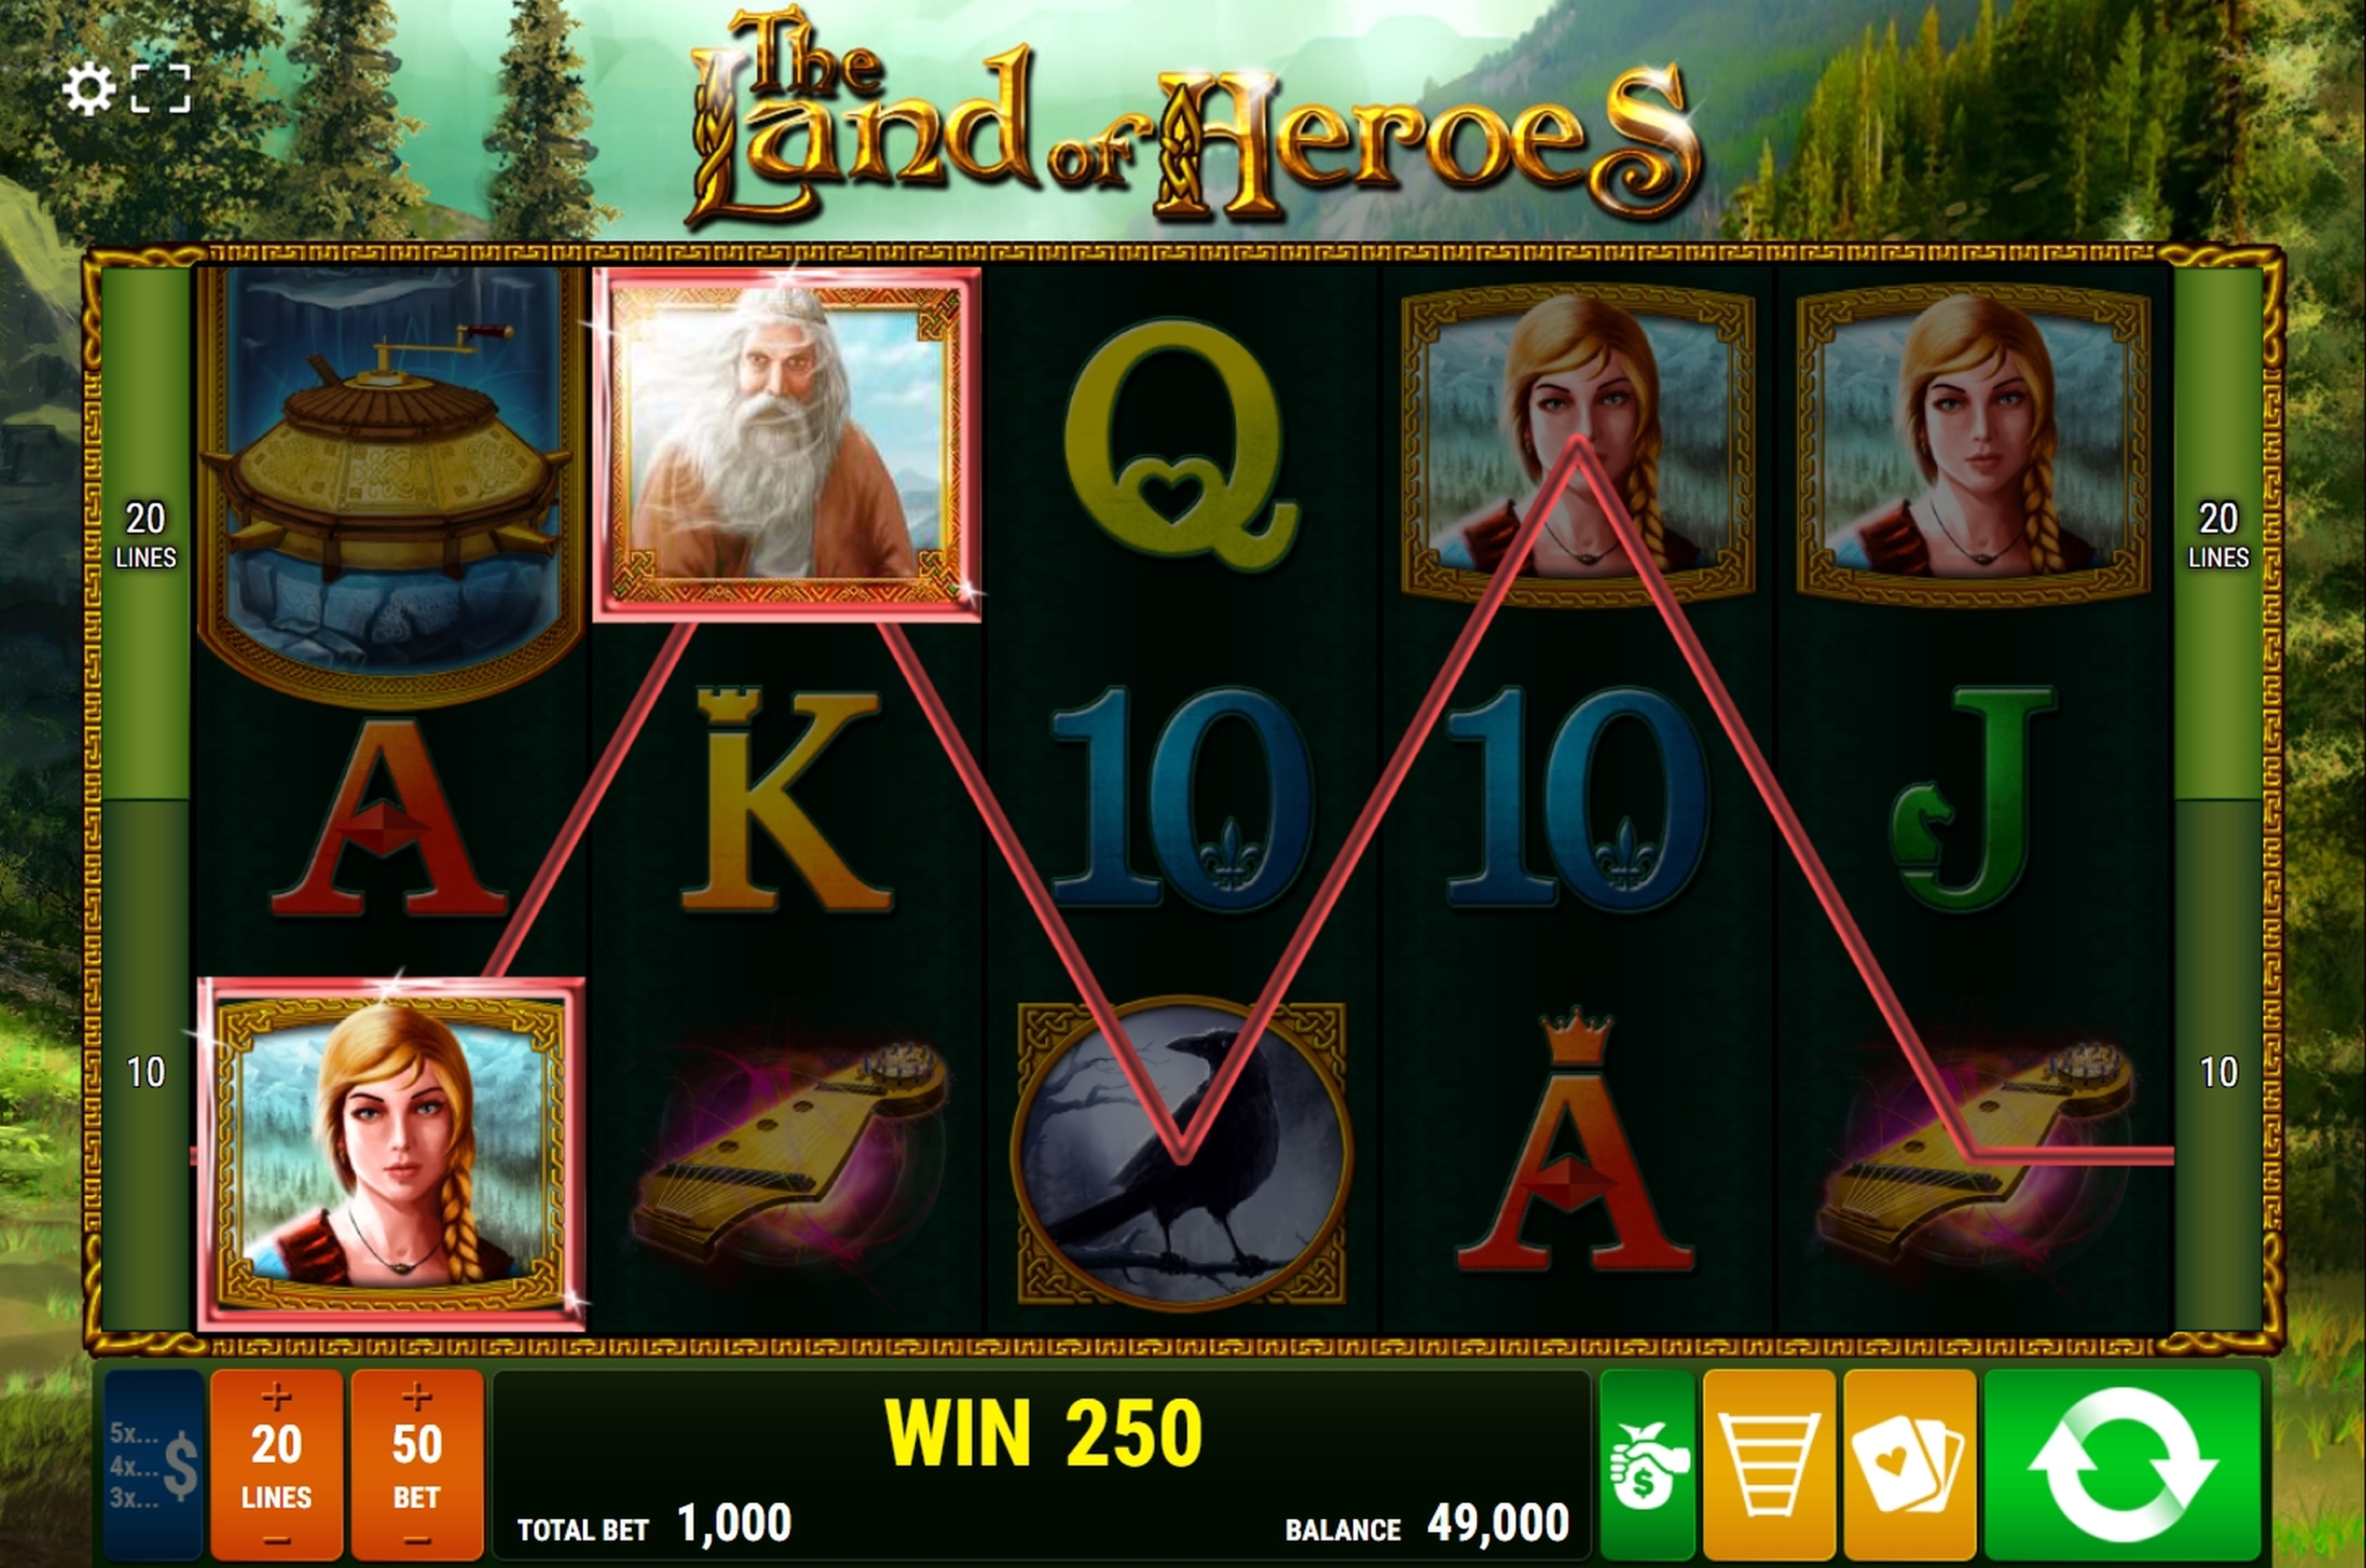 Win Money in The Land of Heroes Free Slot Game by Bally Wulff